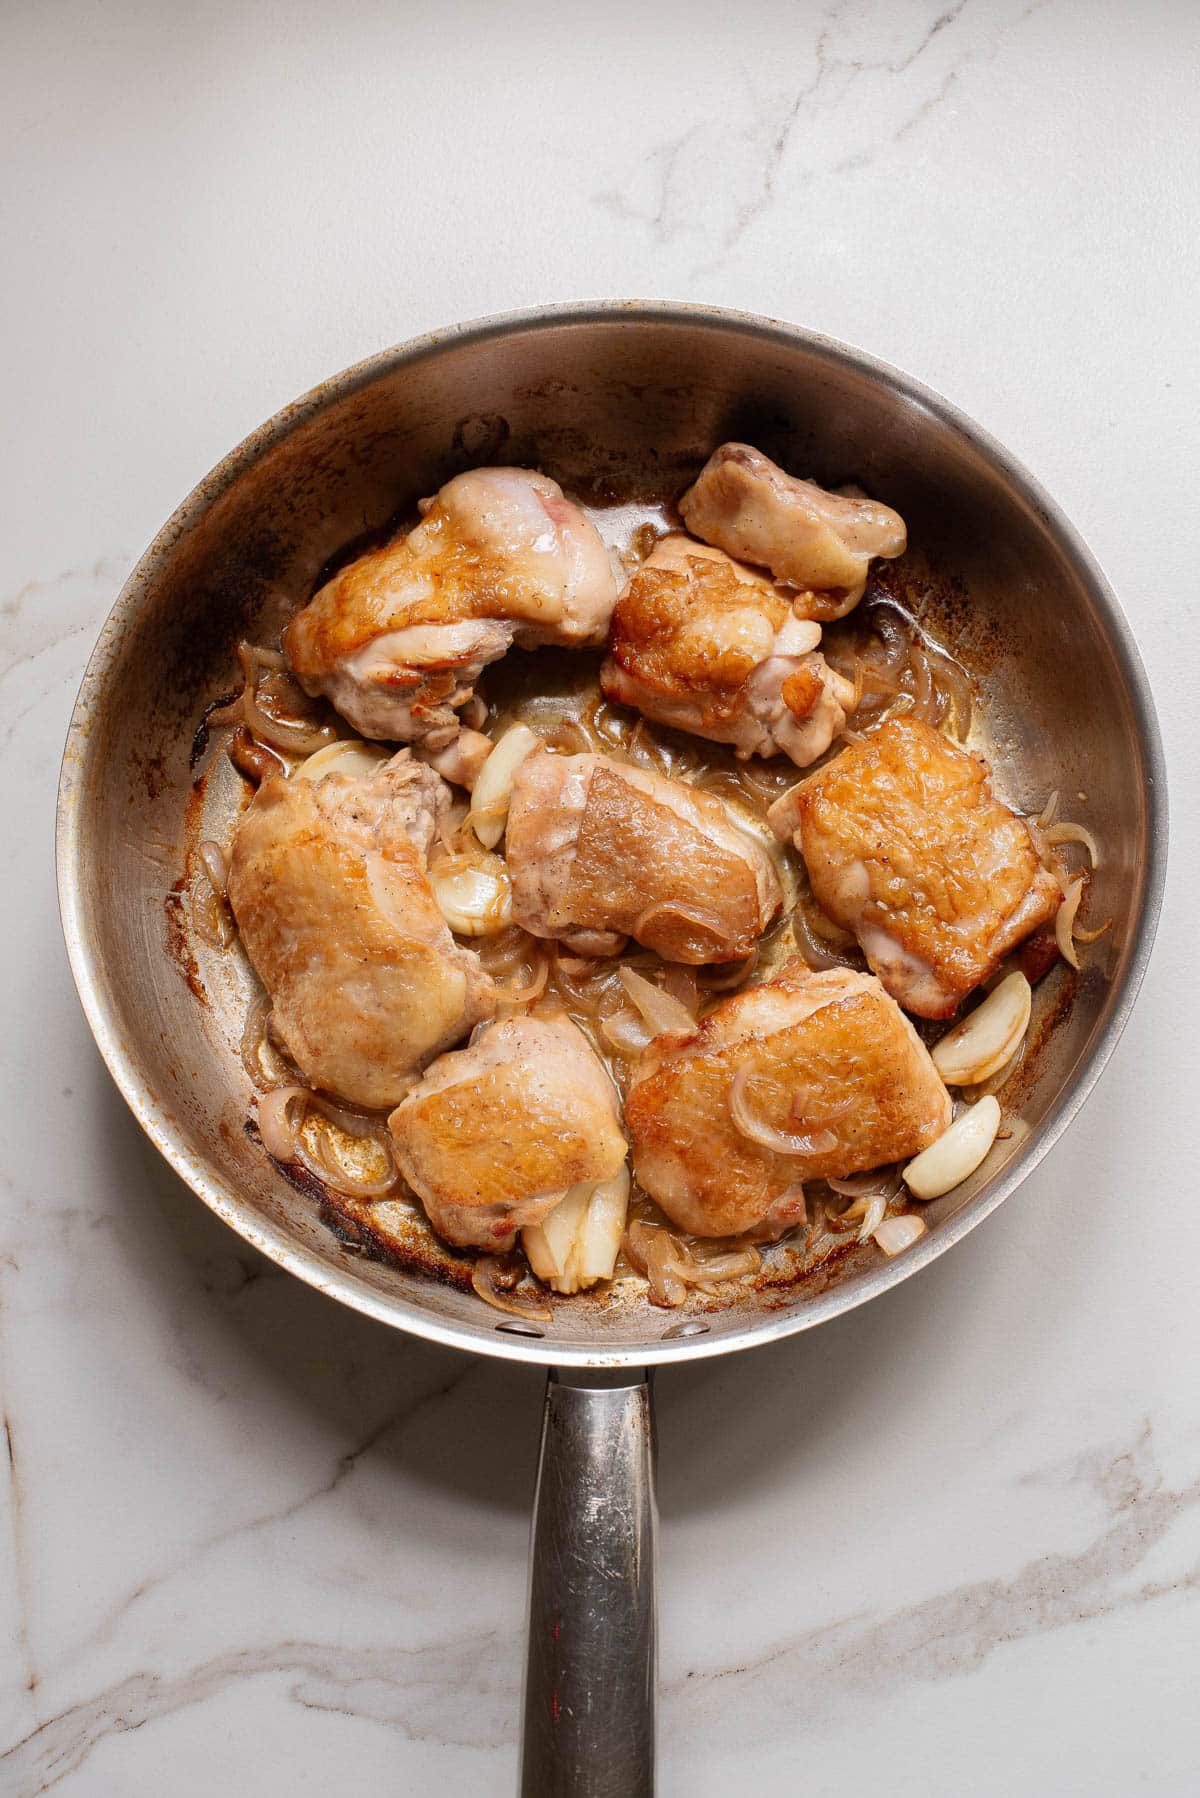 Cooked chicken thighs in a skillet.